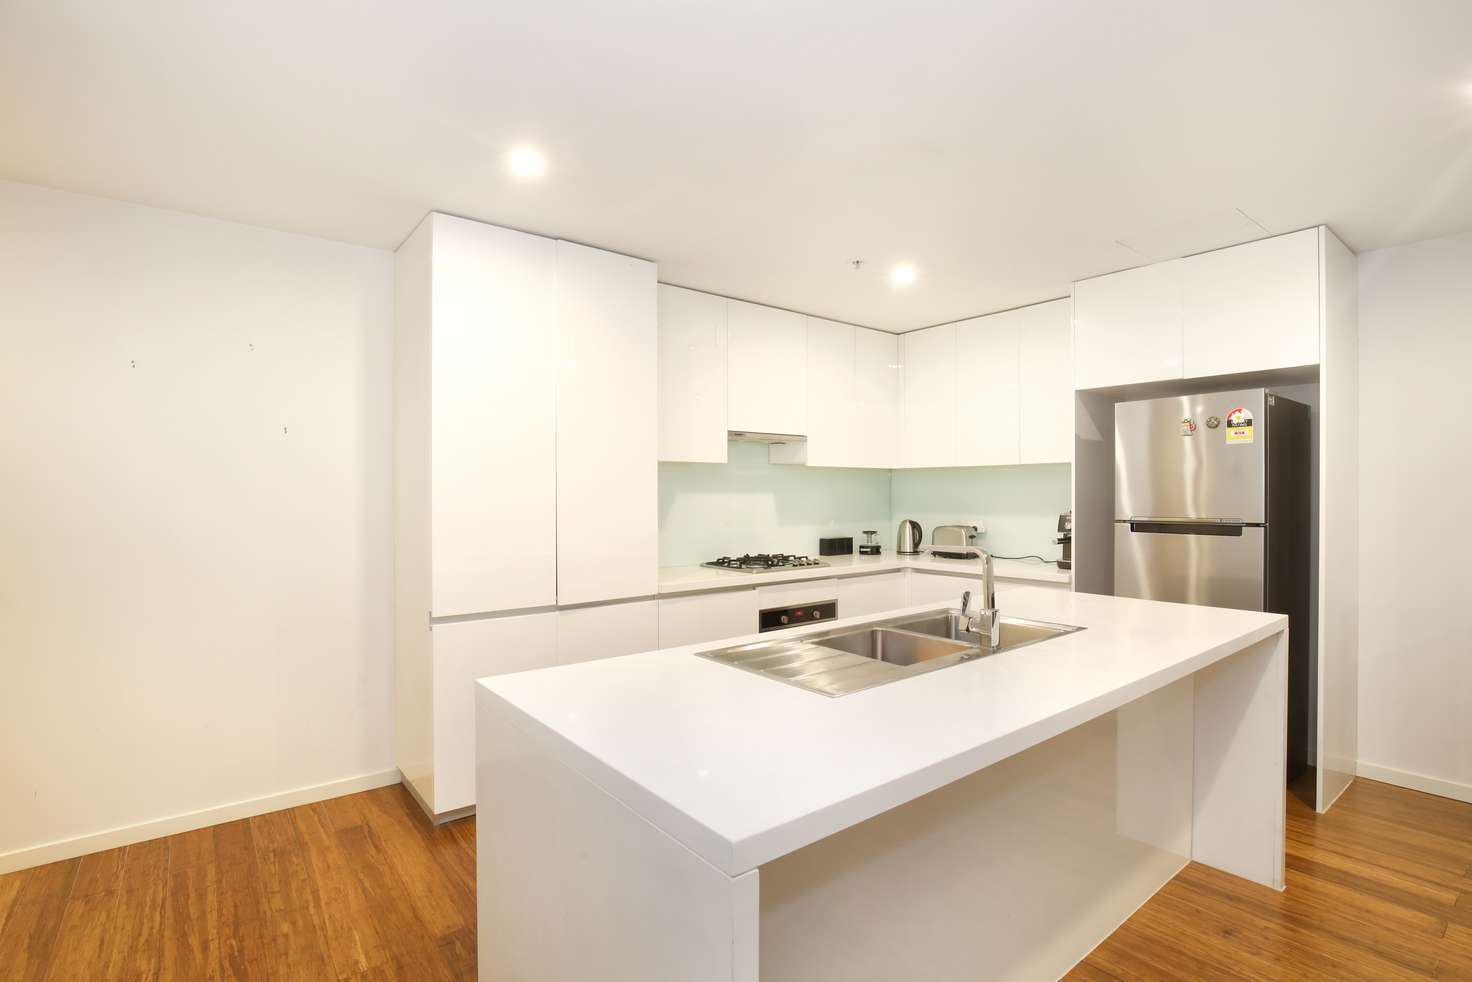 Main view of Homely apartment listing, 104/14 Reynolds Avenue, Ringwood VIC 3134